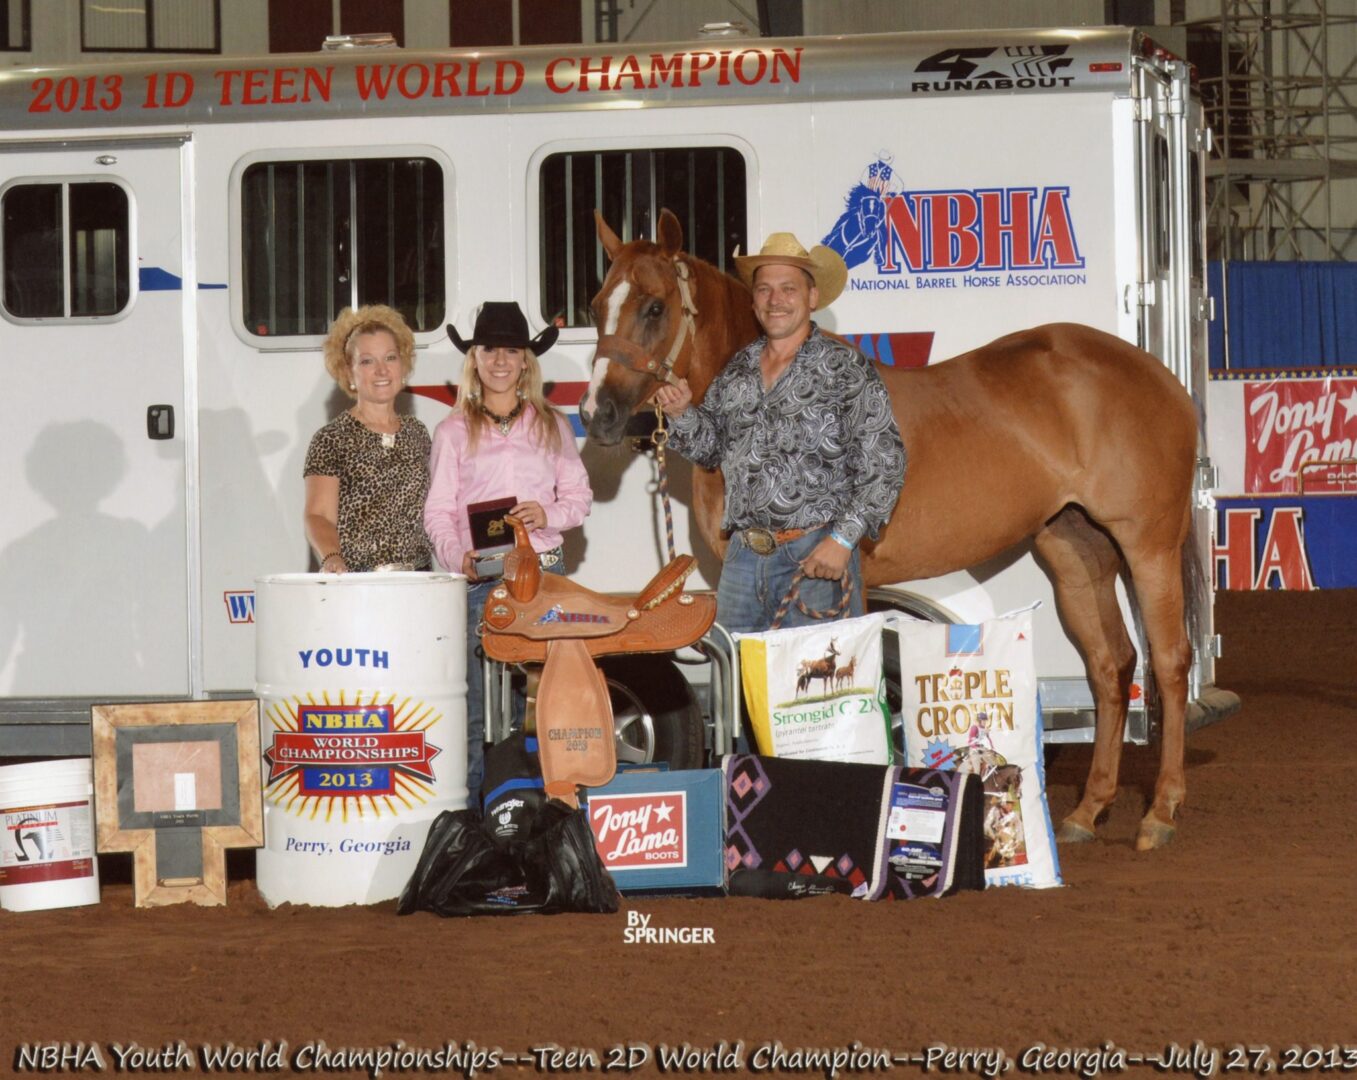 Karly was Teen 2D World Champion at the NBHA Youth World Championships, Perry, GA 2013